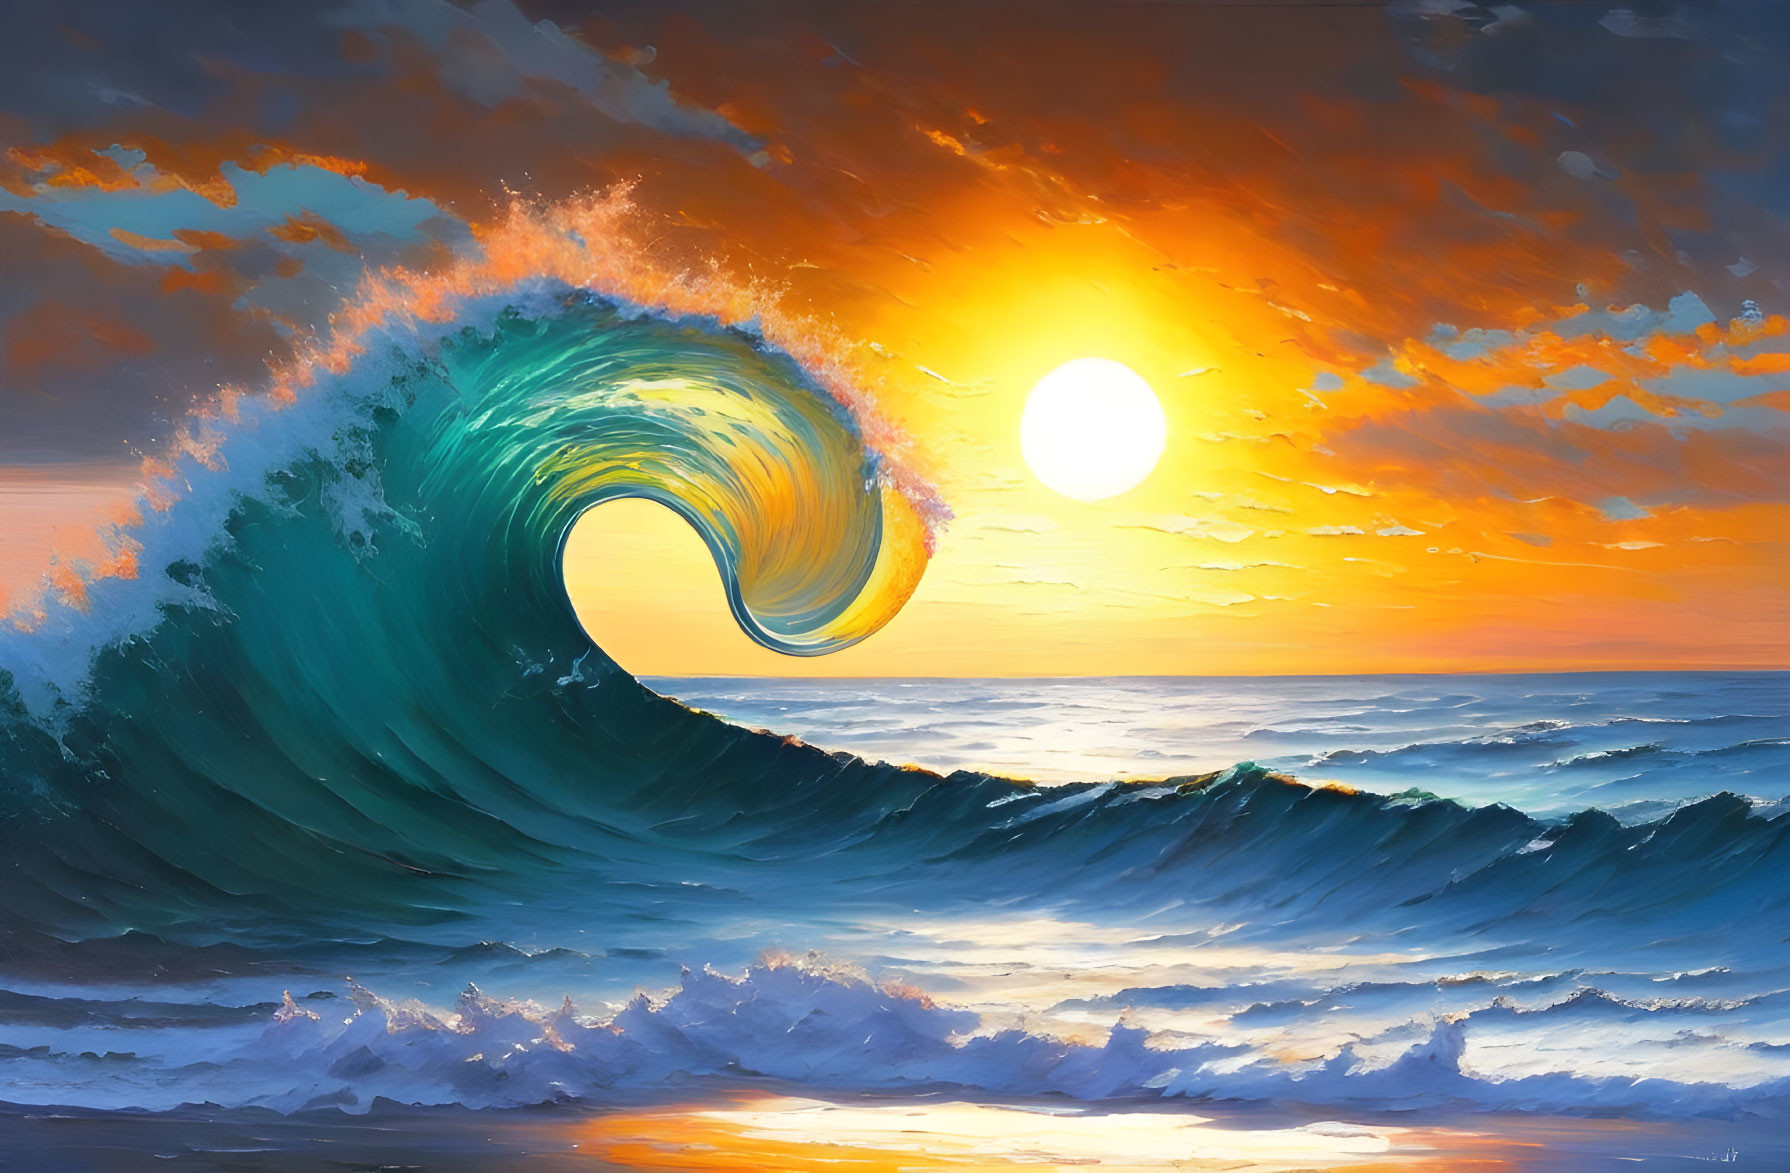 Vibrant sunset over ocean with large curling wave and orange-blue sky